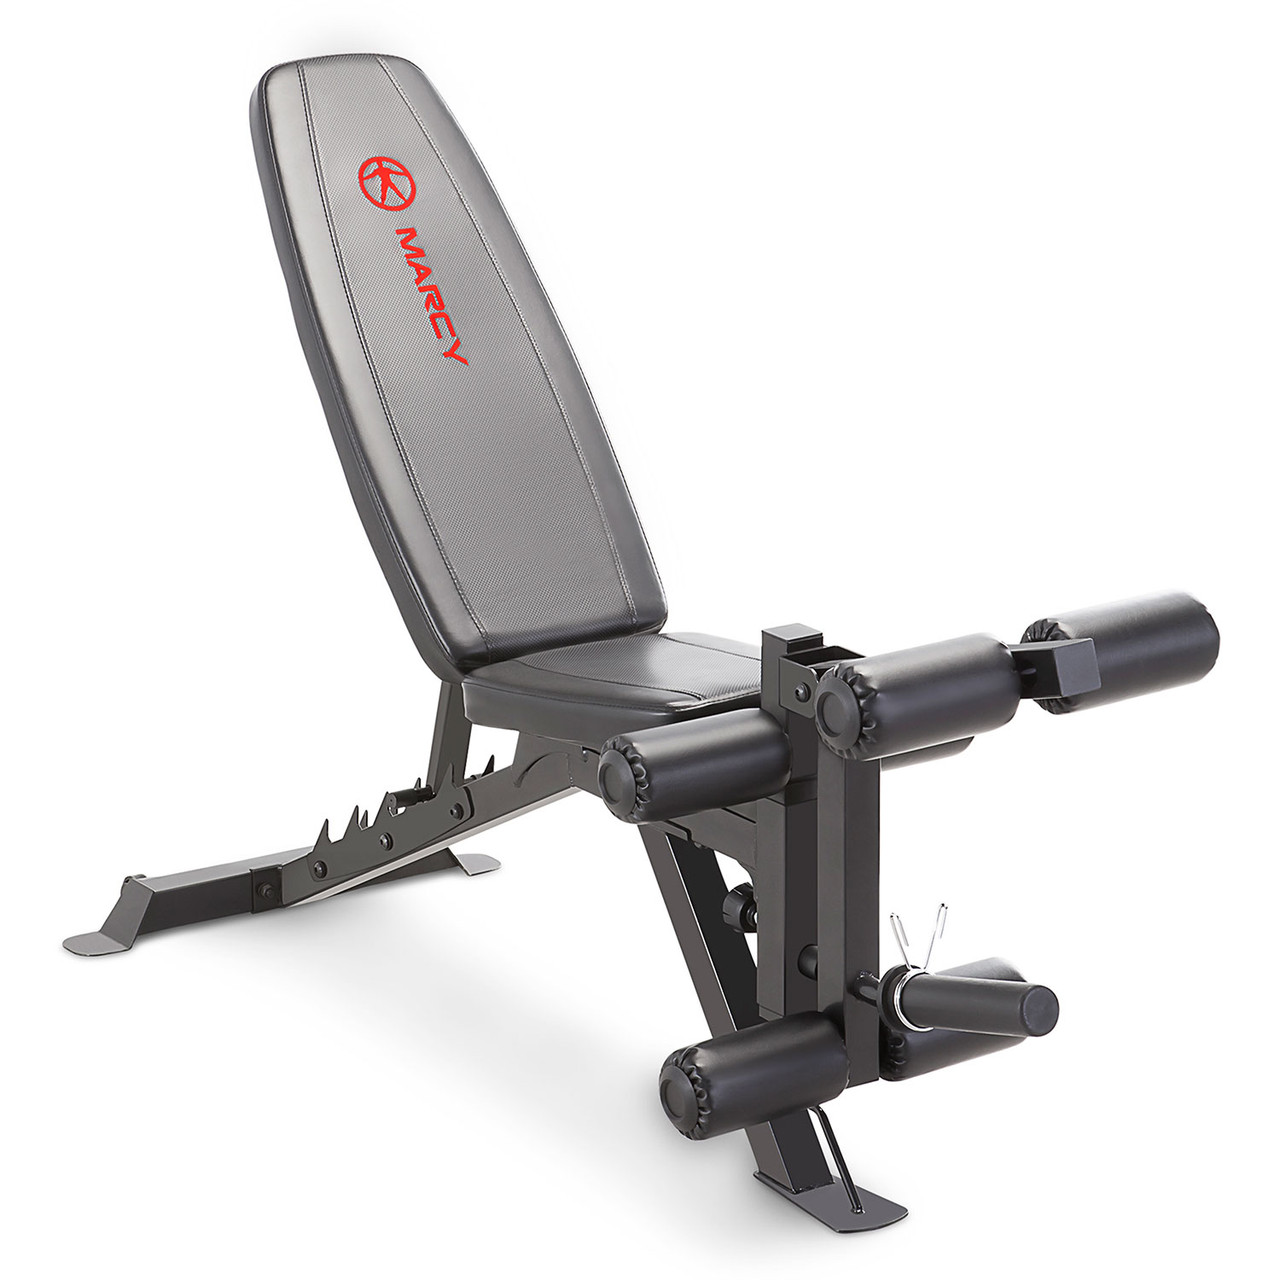 Marcy Deluxe Utility Bench SB-350 Quality Heavy Duty Strength